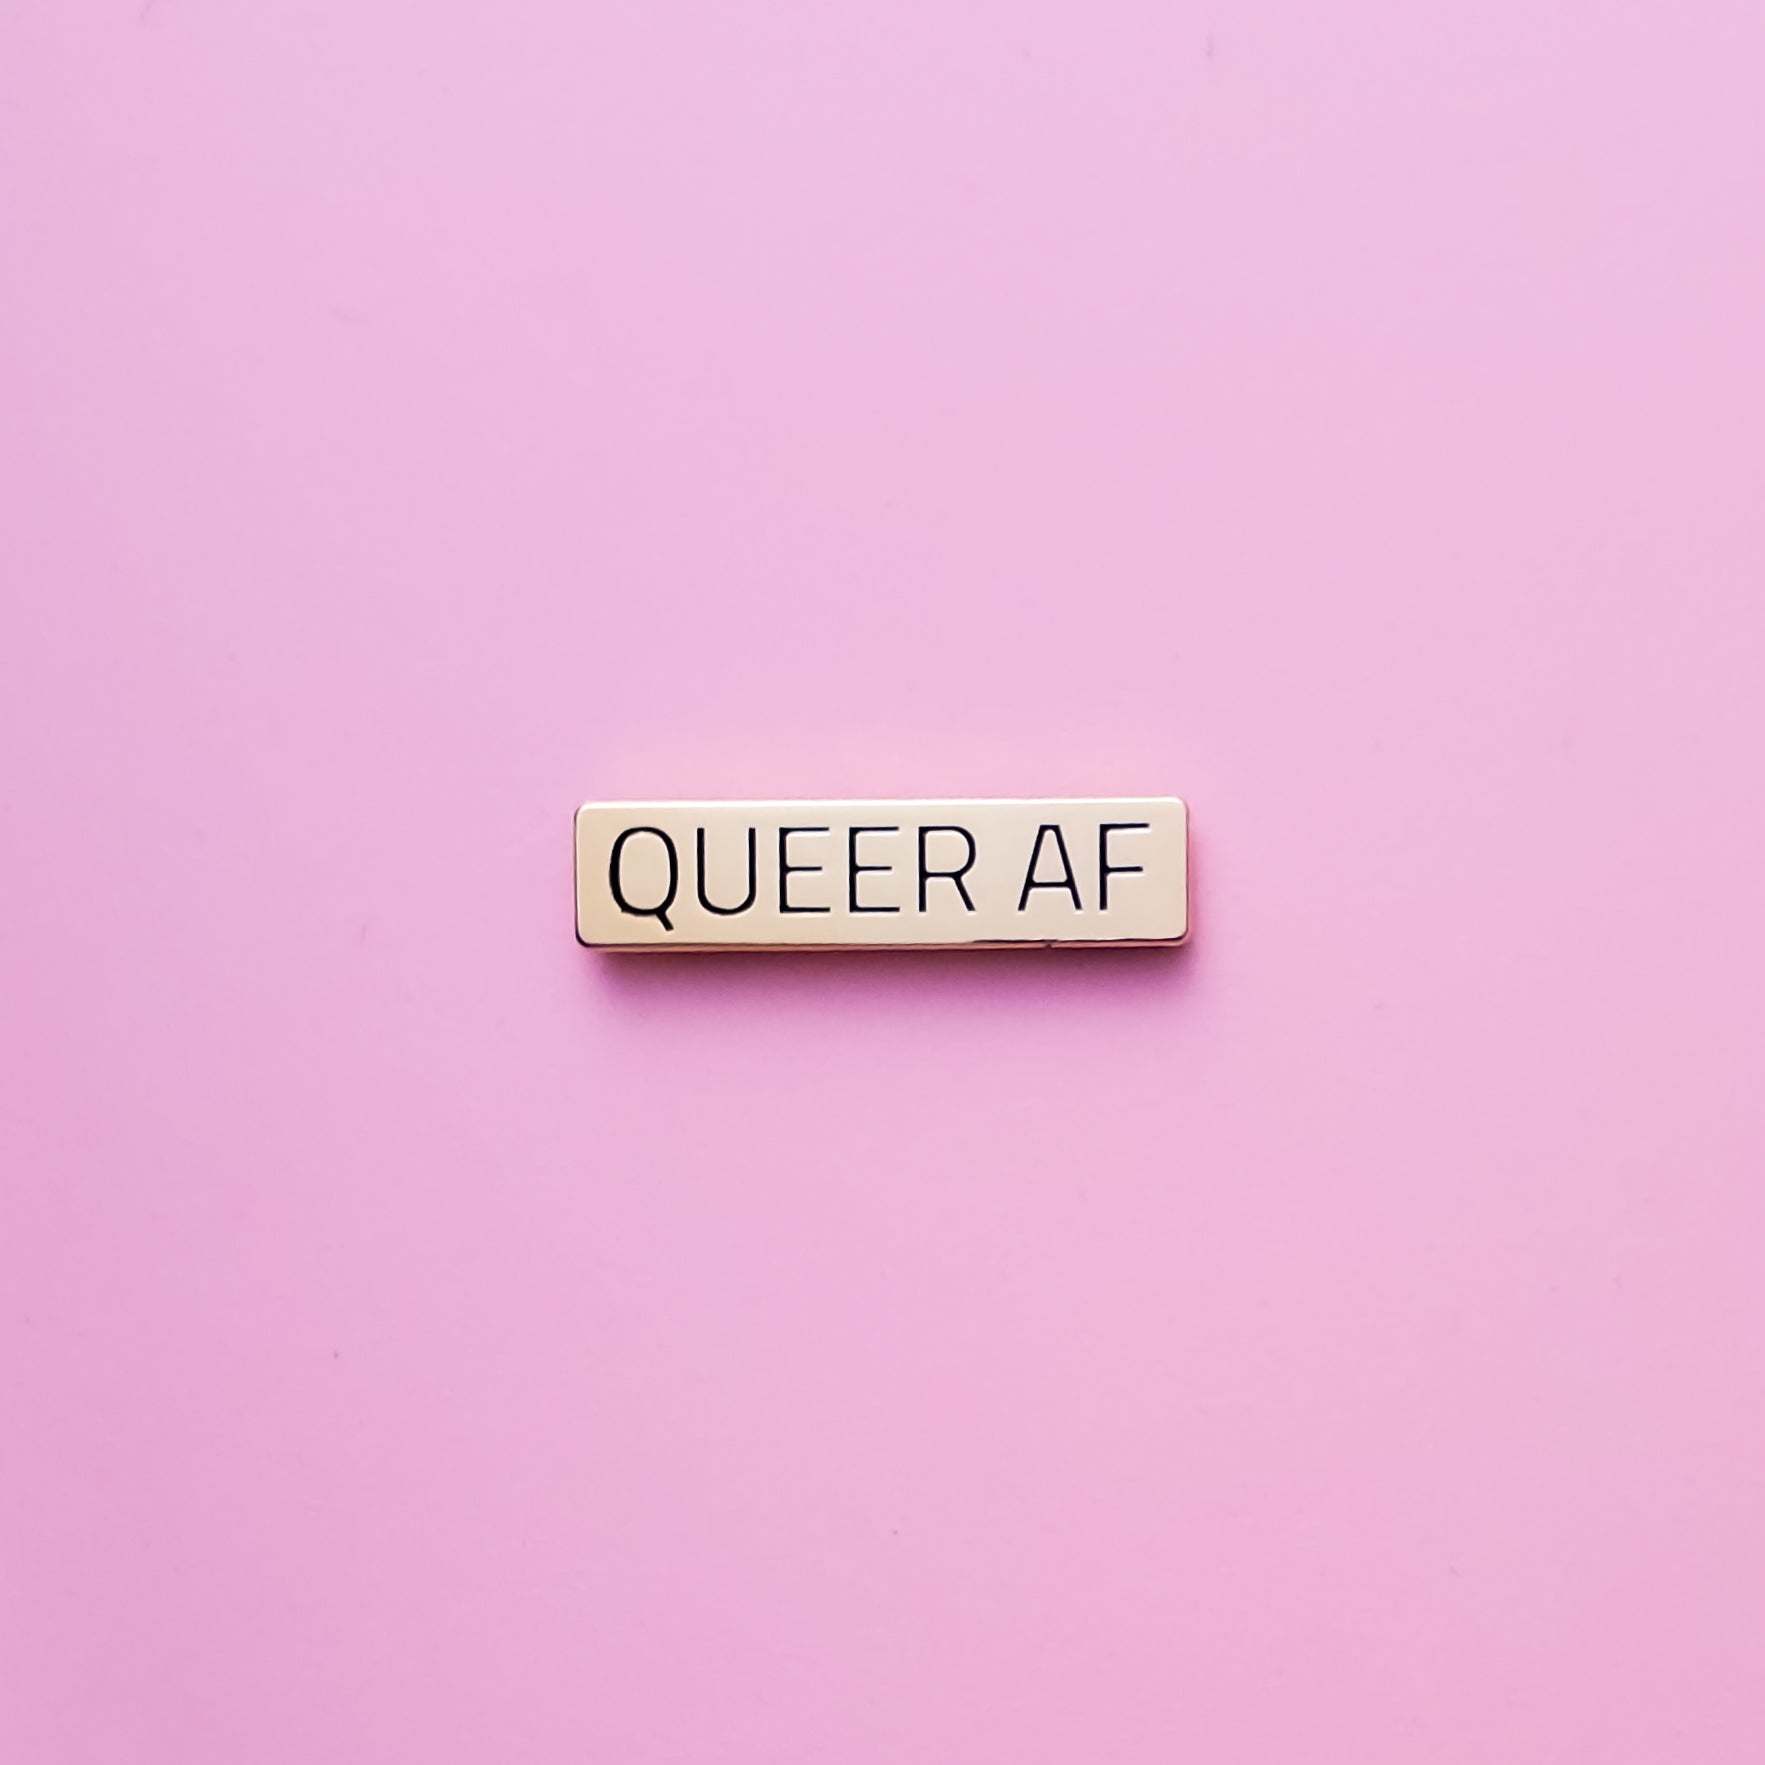 Gold bar-shaped enamel pin reads 'Queer AF' against a pink background. This LGBTQ pin is set in a polished gold color metal. Queer AF Pin - LGBTQ Pins For Sale | Little Rainbow Paper Co